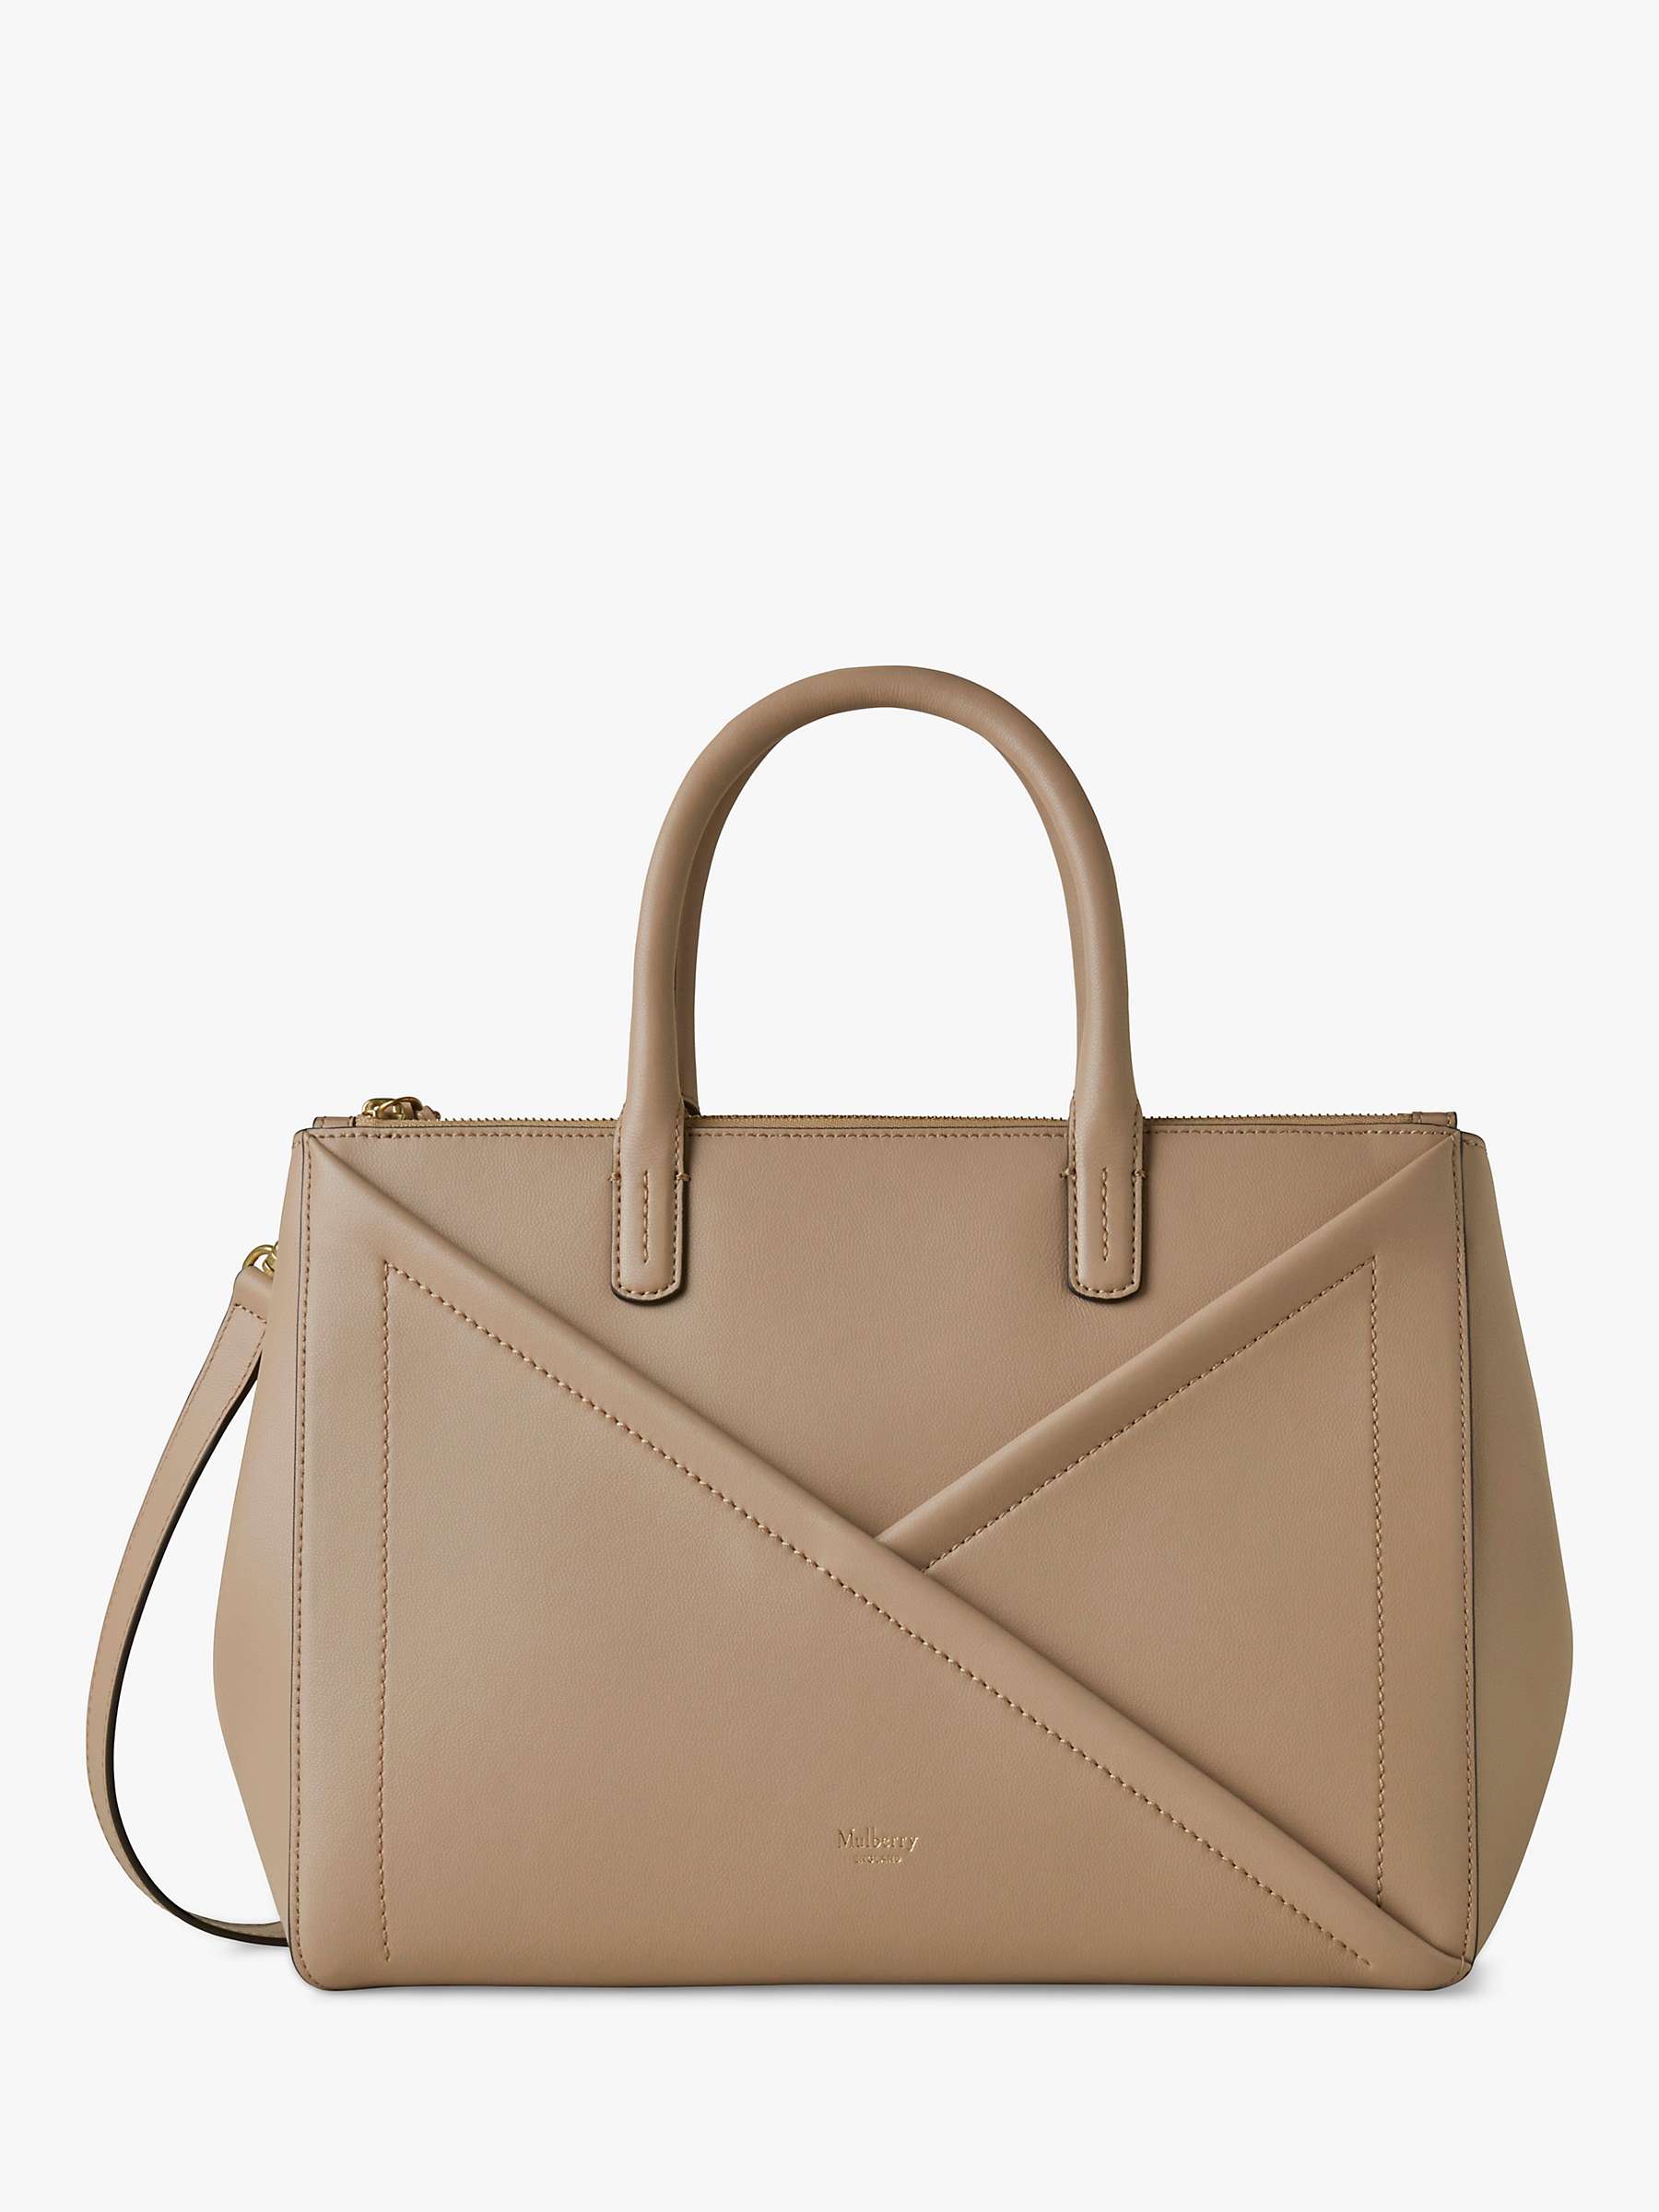 Buy Mulberry M Zipped Micro Classic Grain Leather Top Handle Tote Bag Online at johnlewis.com